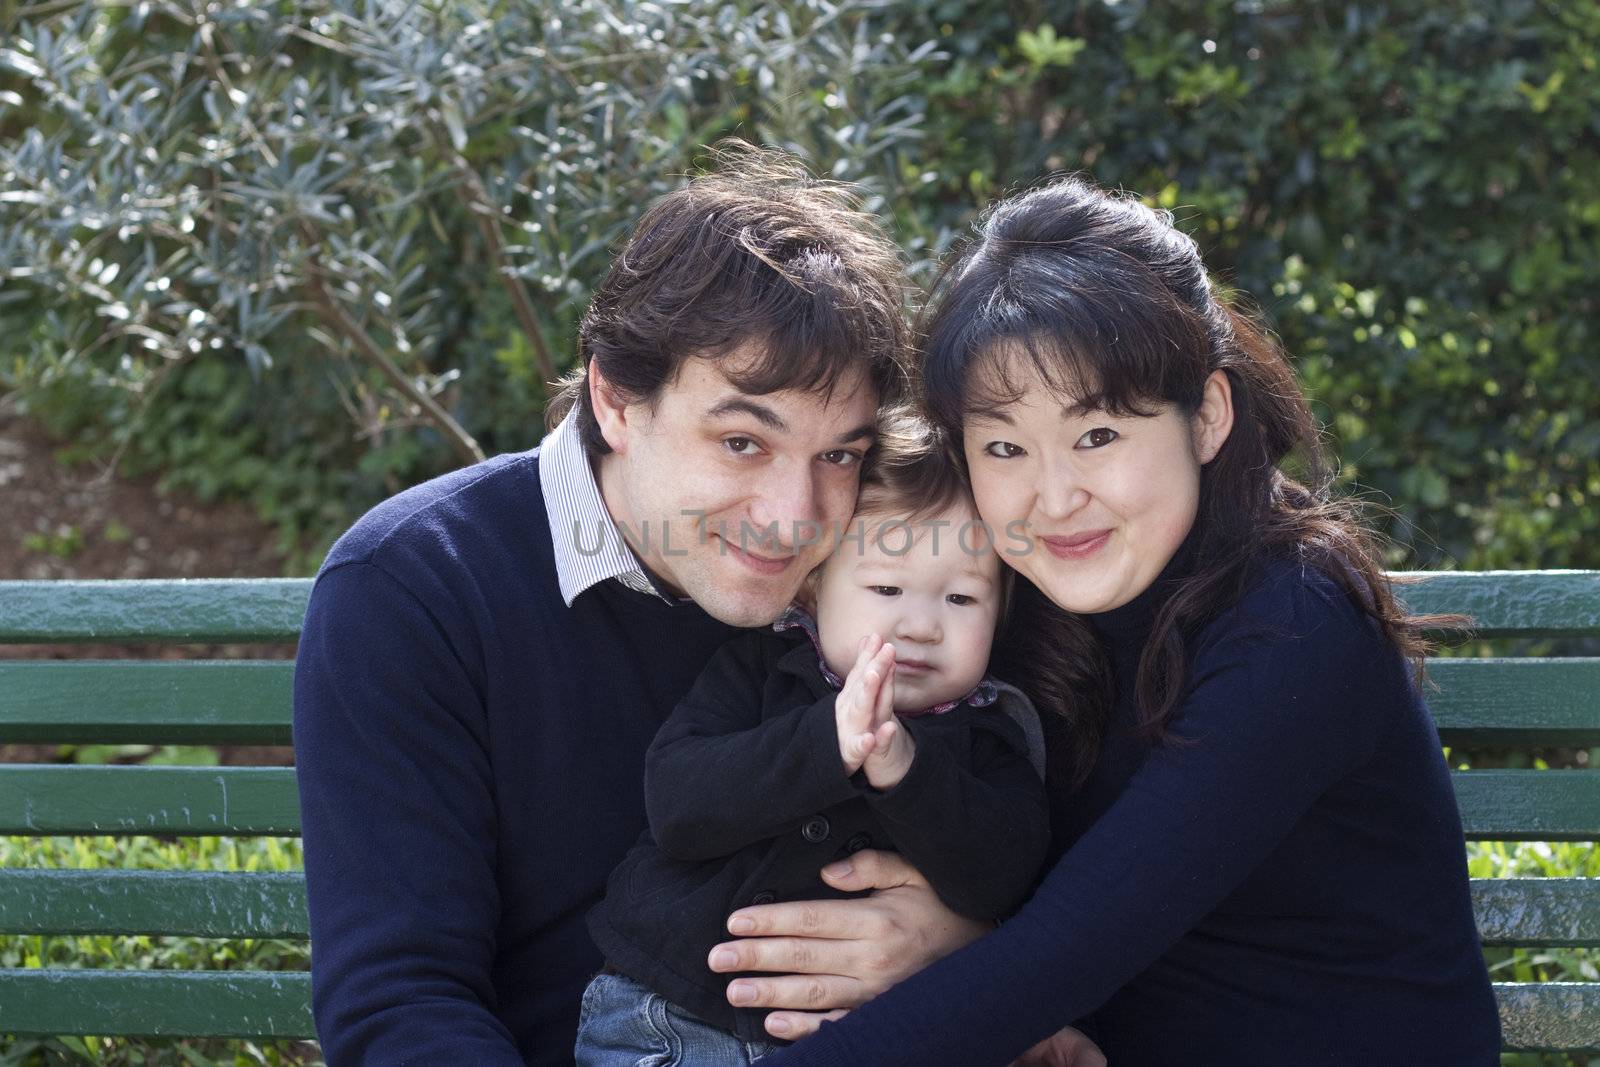 French father and Japanese mother with their baby boy in a park 